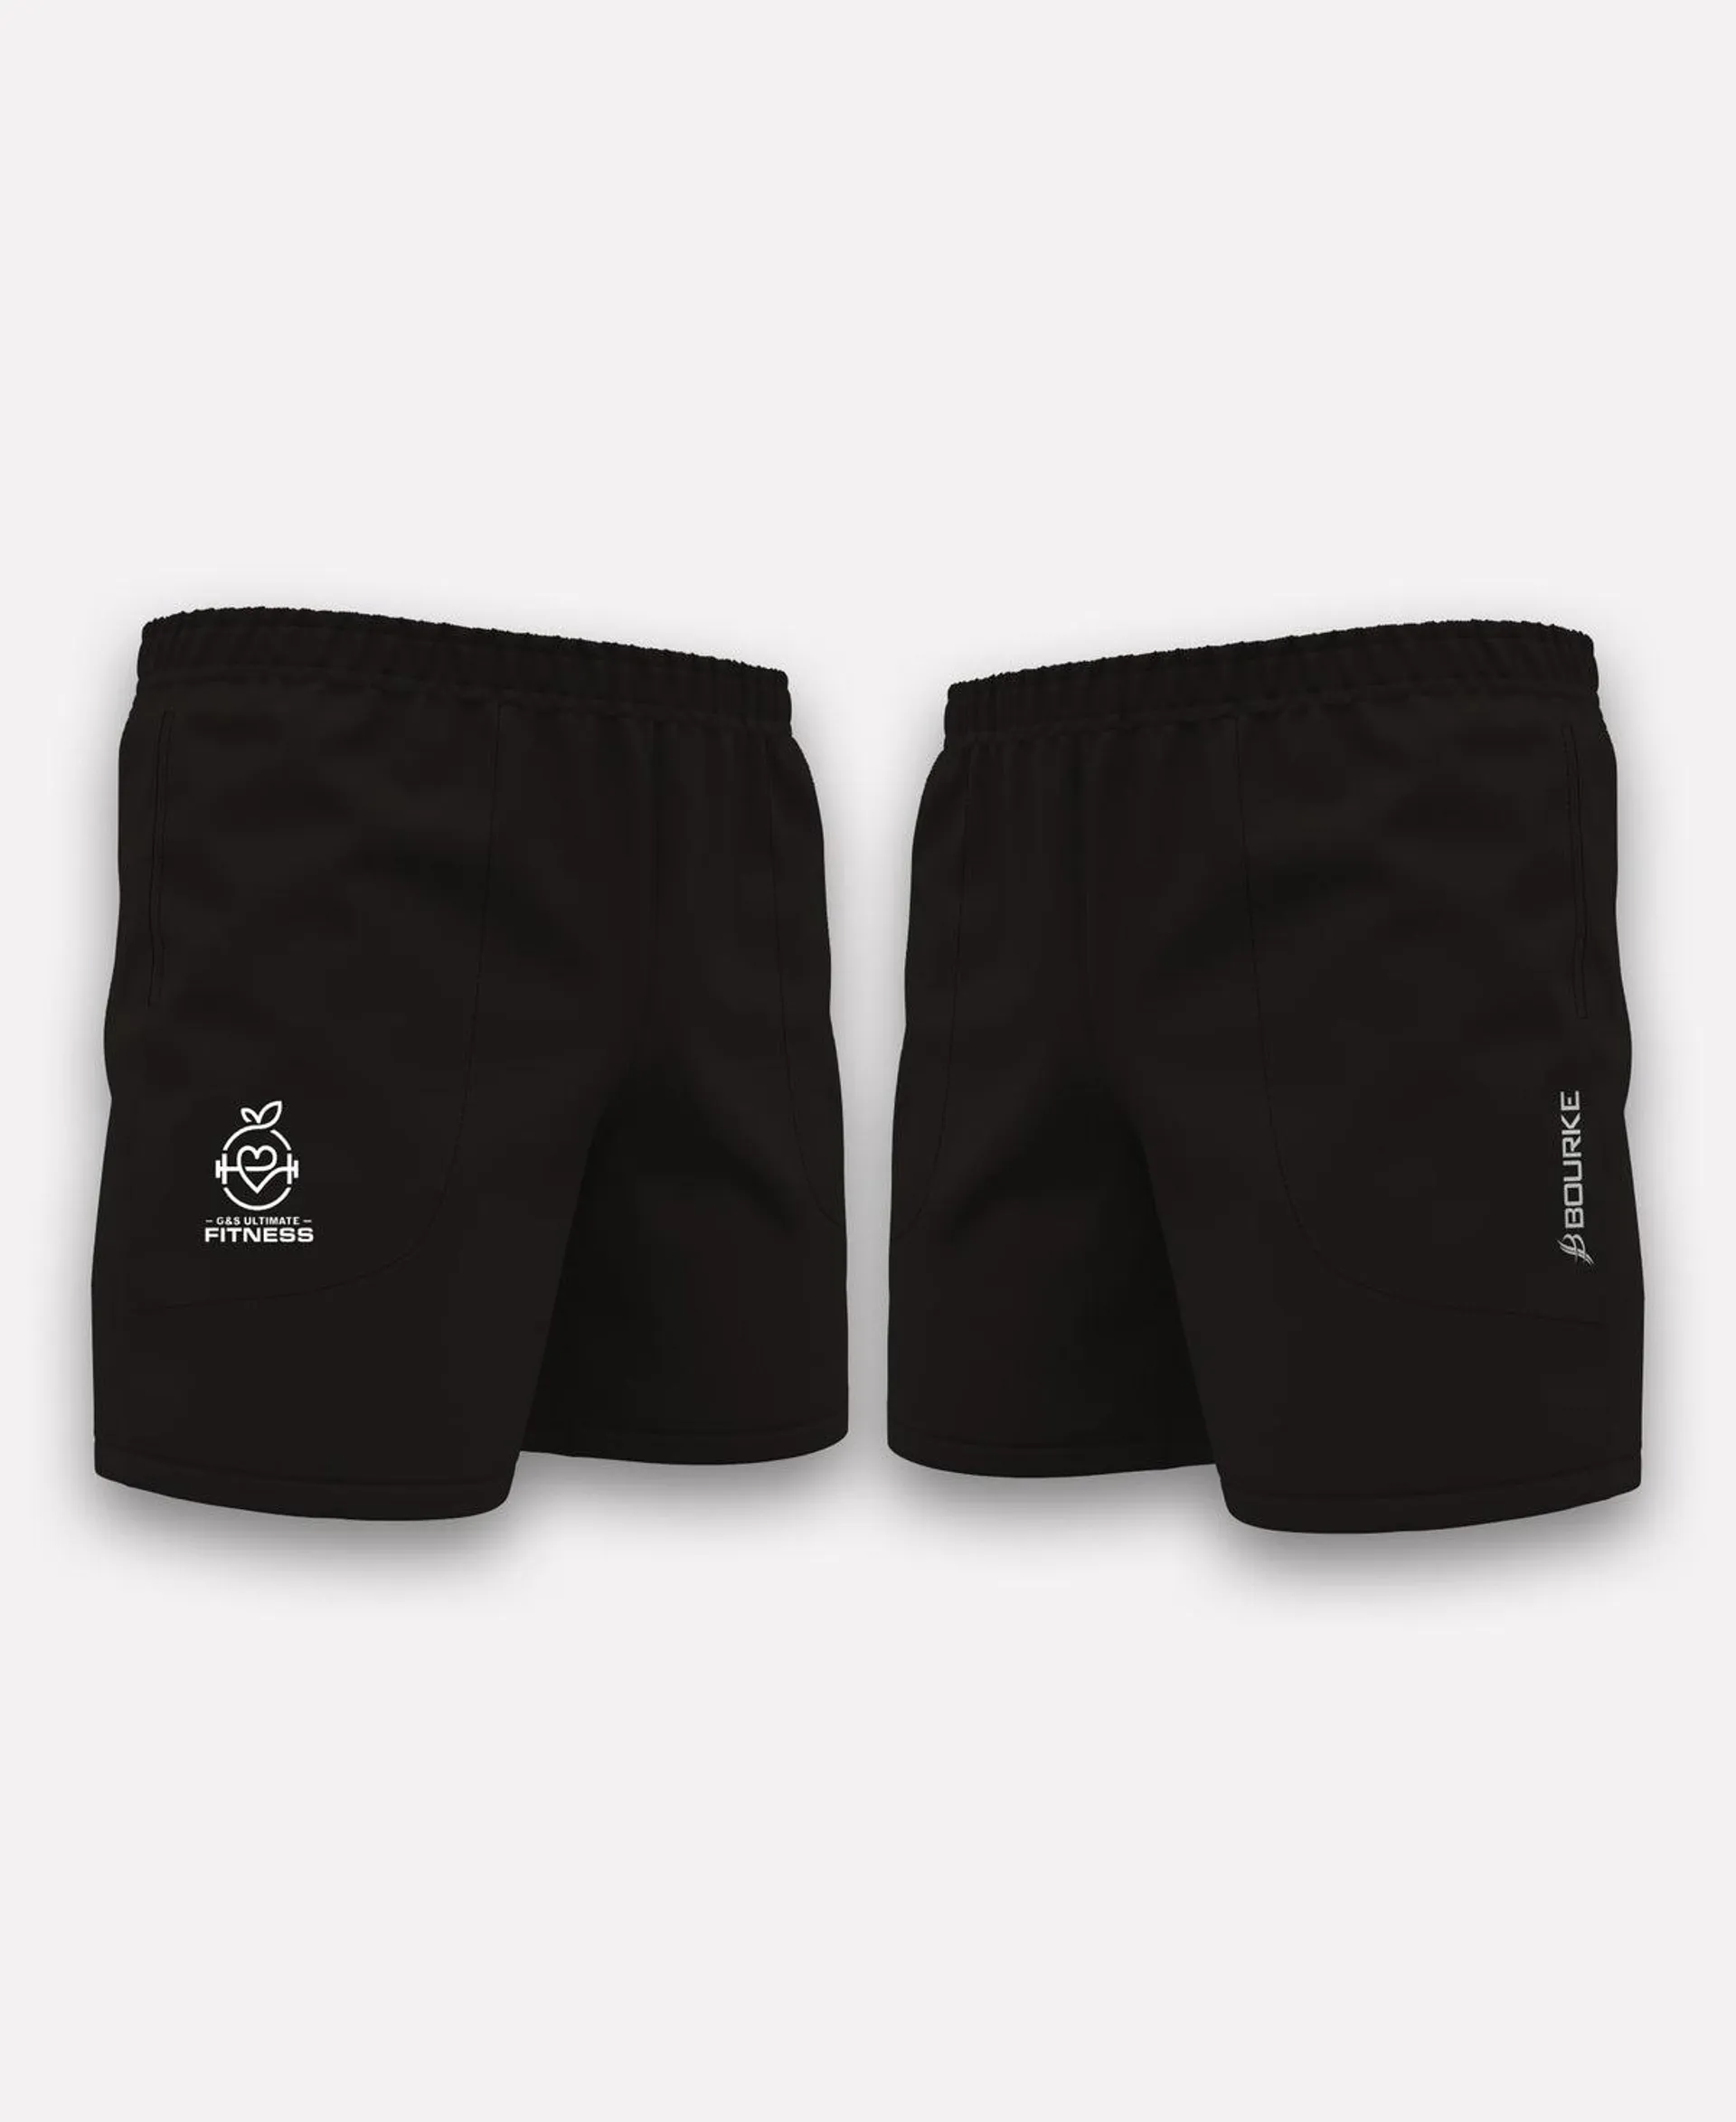 G&S Ultimate Fitness TACA Gym Shorts